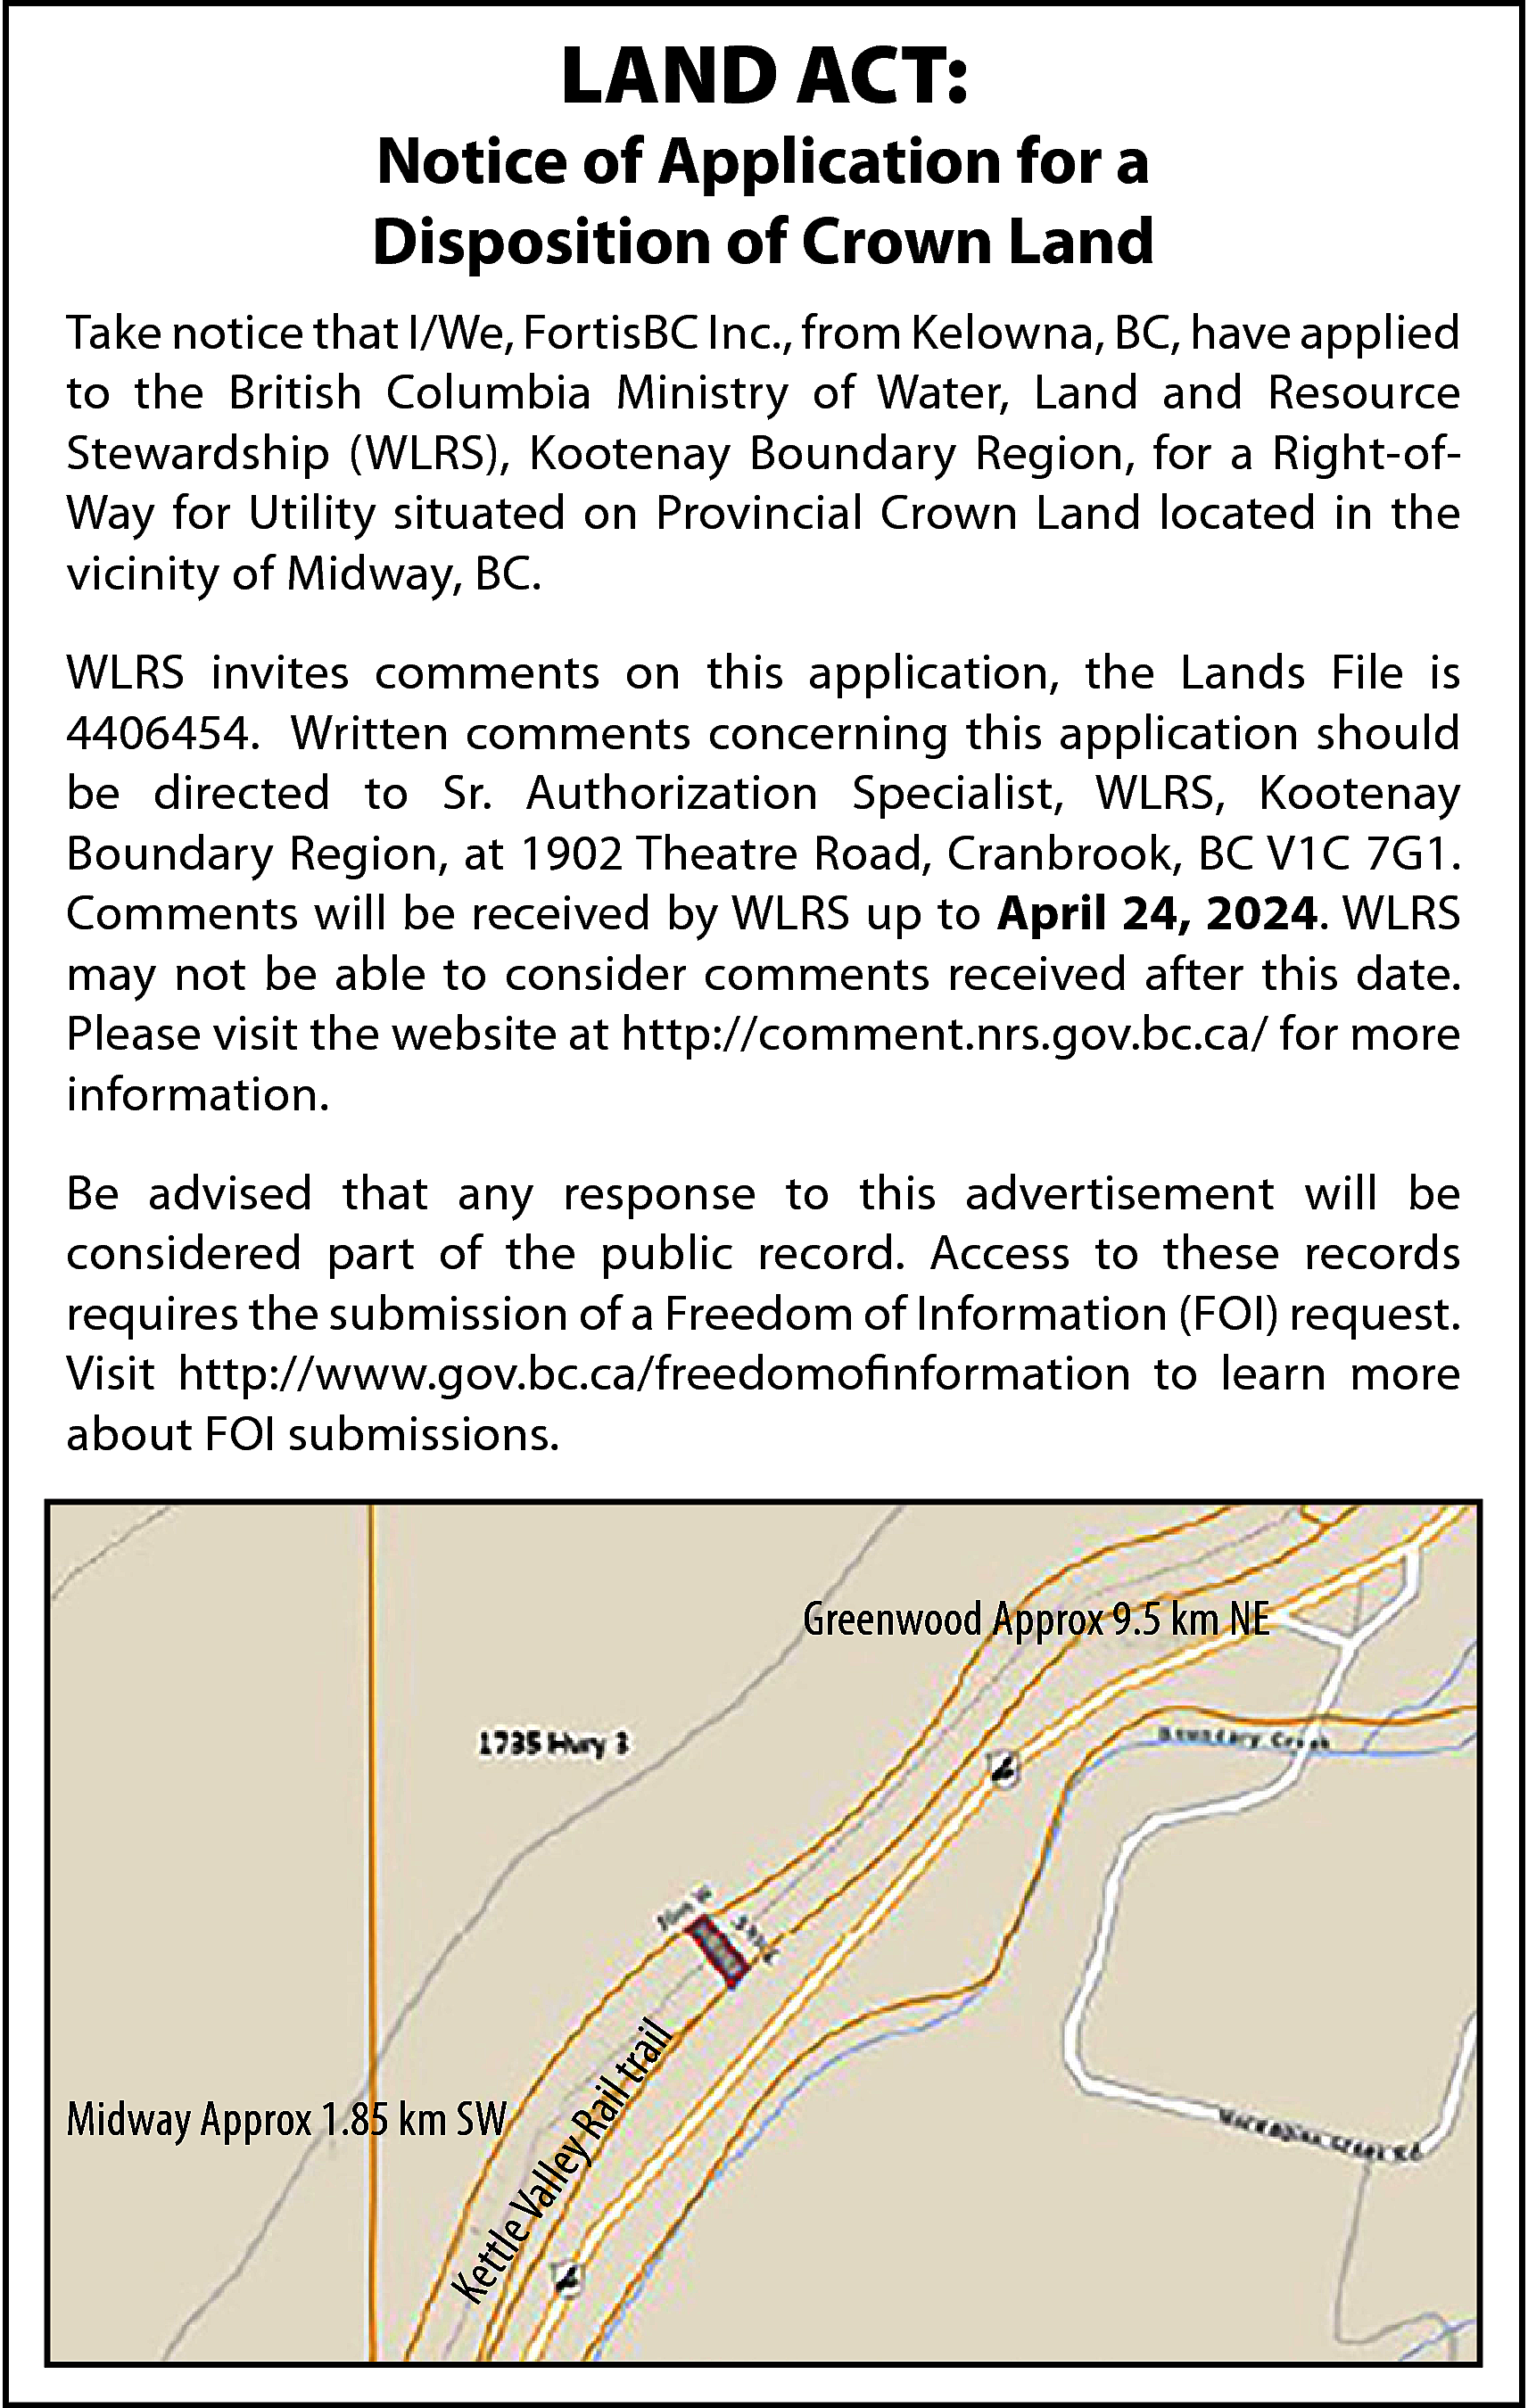 LAND ACT: <br> <br>Notice of  LAND ACT:    Notice of Application for a  Disposition of Crown Land  Take notice that I/We, FortisBC Inc., from Kelowna, BC, have applied  to the British Columbia Ministry of Water, Land and Resource  Stewardship (WLRS), Kootenay Boundary Region, for a Right-ofWay for Utility situated on Provincial Crown Land located in the  vicinity of Midway, BC.  WLRS invites comments on this application, the Lands File is  4406454. Written comments concerning this application should  be directed to Sr. Authorization Specialist, WLRS, Kootenay  Boundary Region, at 1902 Theatre Road, Cranbrook, BC V1C 7G1.  Comments will be received by WLRS up to April 24, 2024. WLRS  may not be able to consider comments received after this date.  Please visit the website at http://comment.nrs.gov.bc.ca/ for more  information.  Be advised that any response to this advertisement will be  considered part of the public record. Access to these records  requires the submission of a Freedom of Information (FOI) request.  Visit http://www.gov.bc.ca/freedomofinformation to learn more  about FOI submissions.    Ke t    tle    yR    Val  le    Midway Approx 1.85 km SW    ail    t ra    il    Greenwood Approx 9.5 km NE    